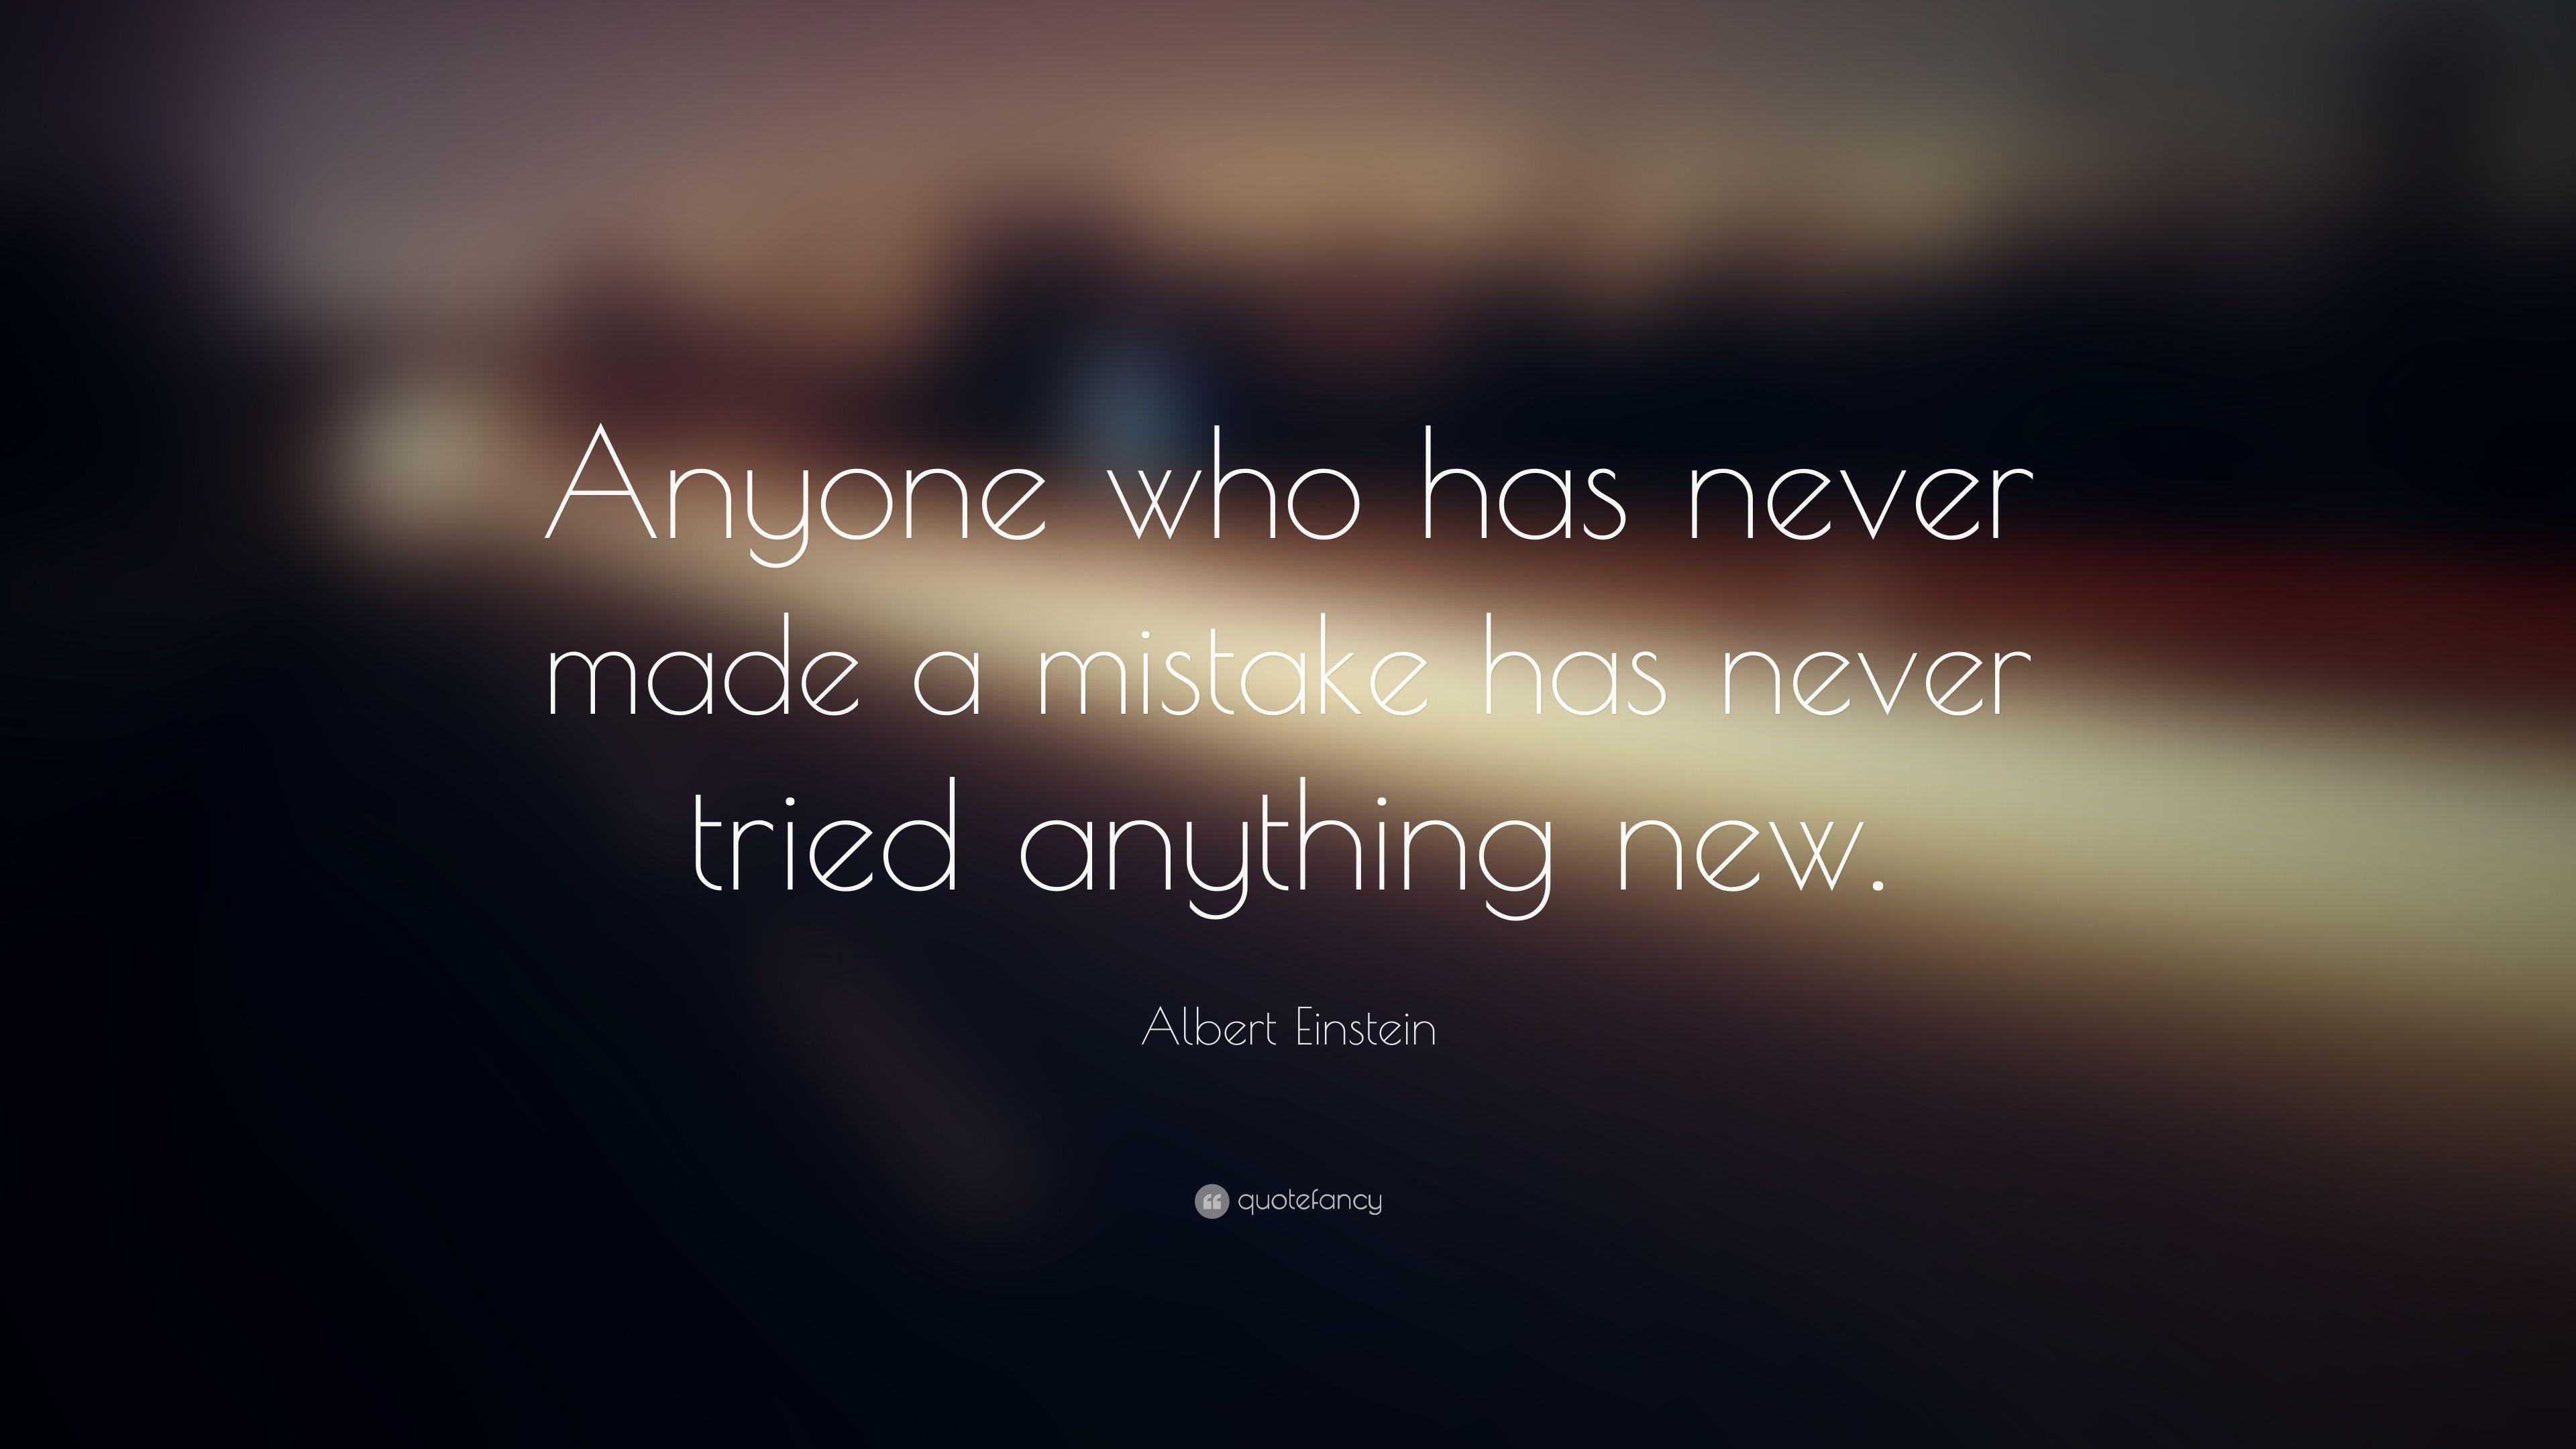 Albert Einstein Quote: “Anyone who has never made a mistake has